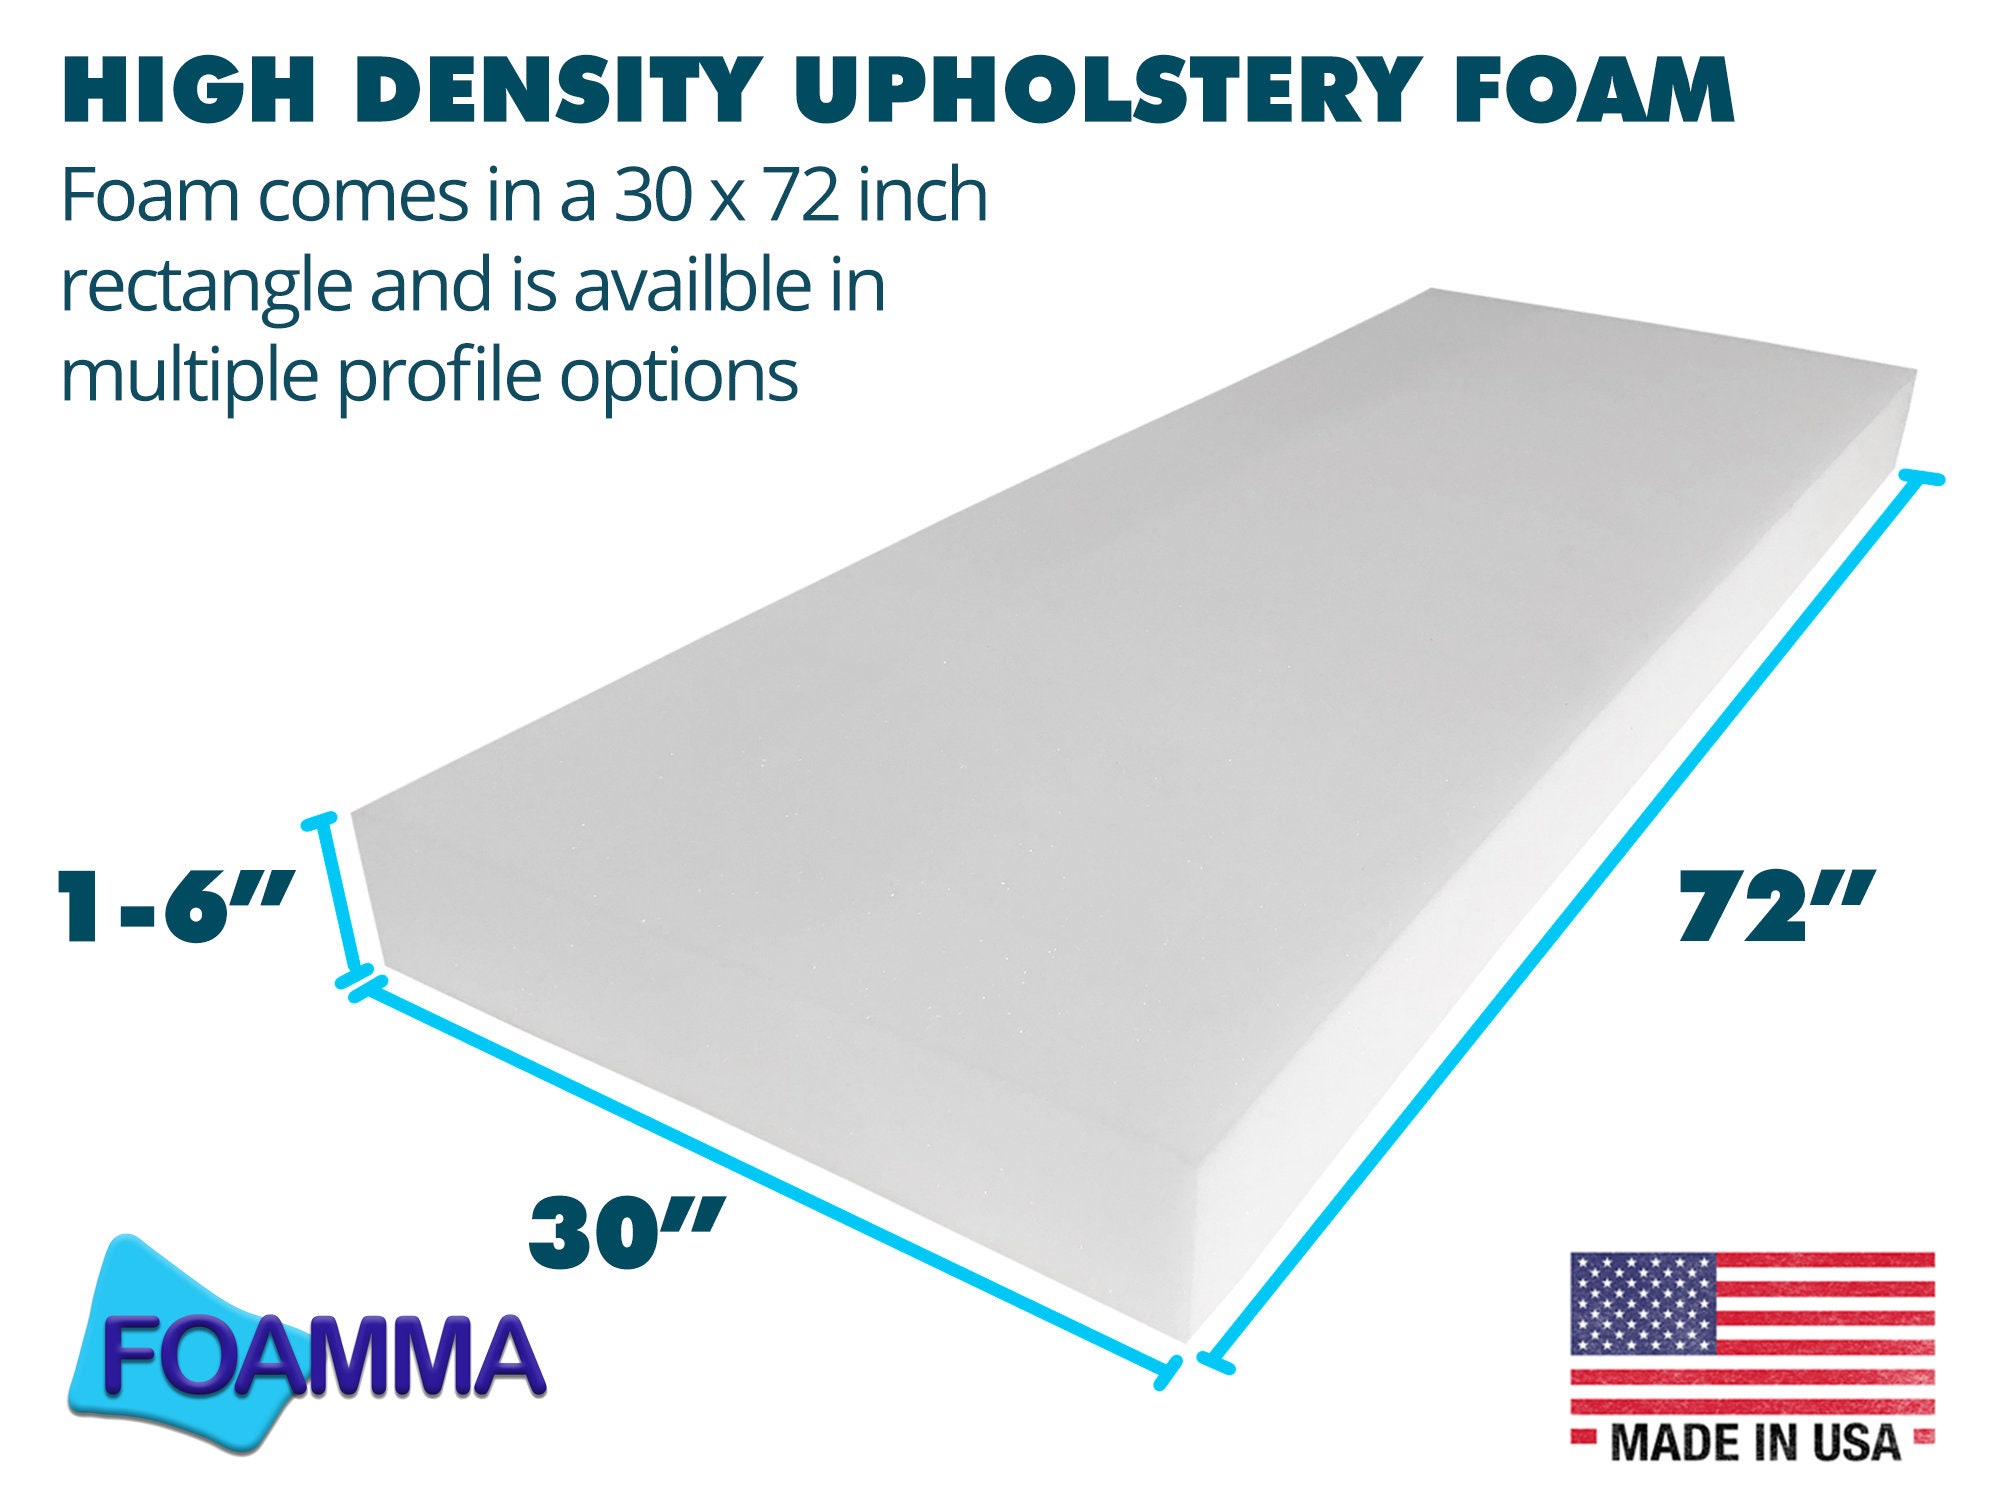 AK TRADING Upholstery High Density Cushion, Seat Replacement Foam Sheet/ Padding 6 x 24 x 72 inches. 